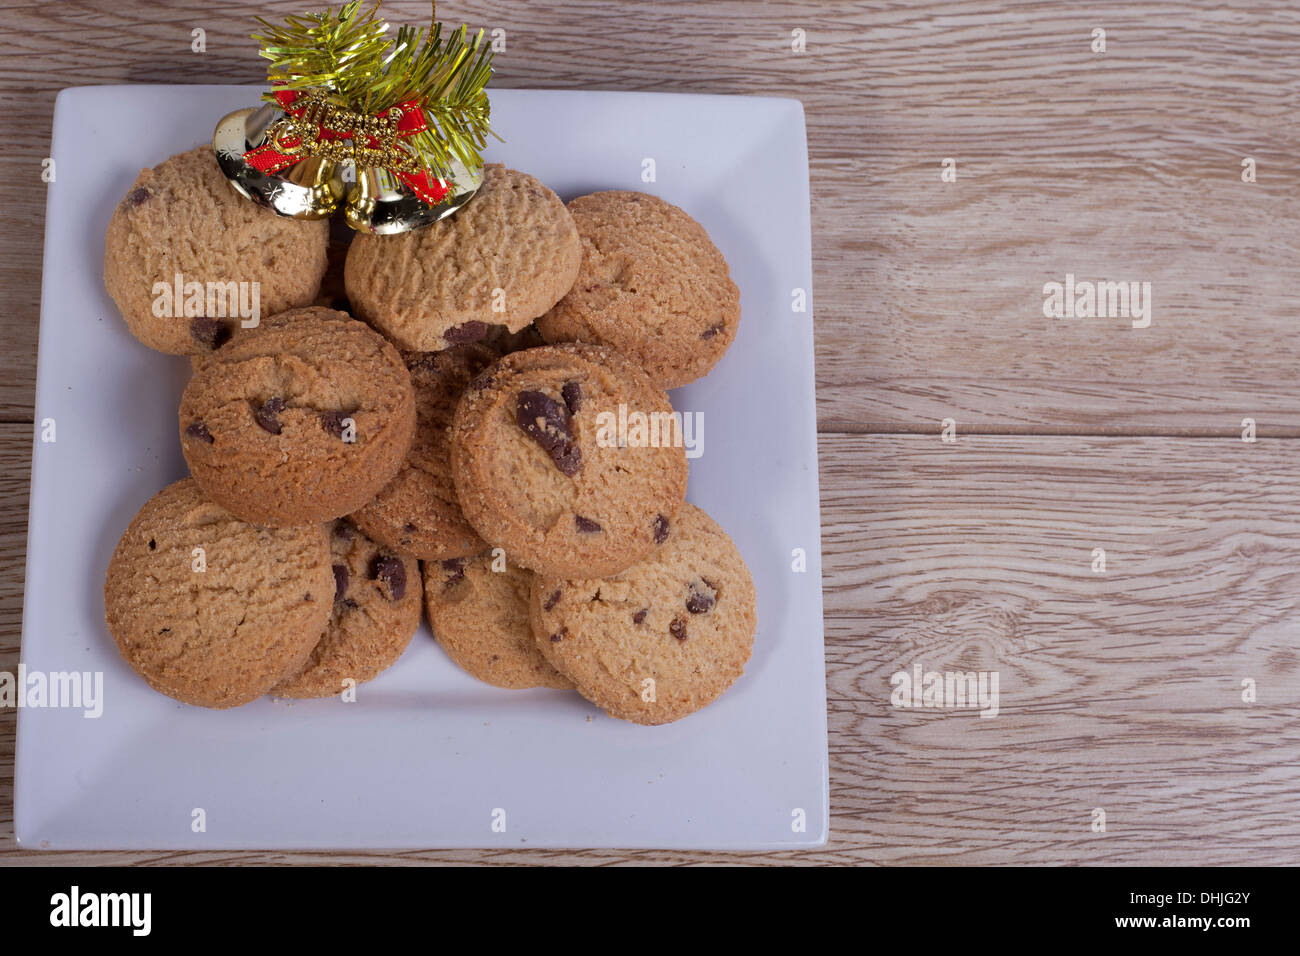 Plate of chocolate chip cookies with christmas decorations Stock Photo